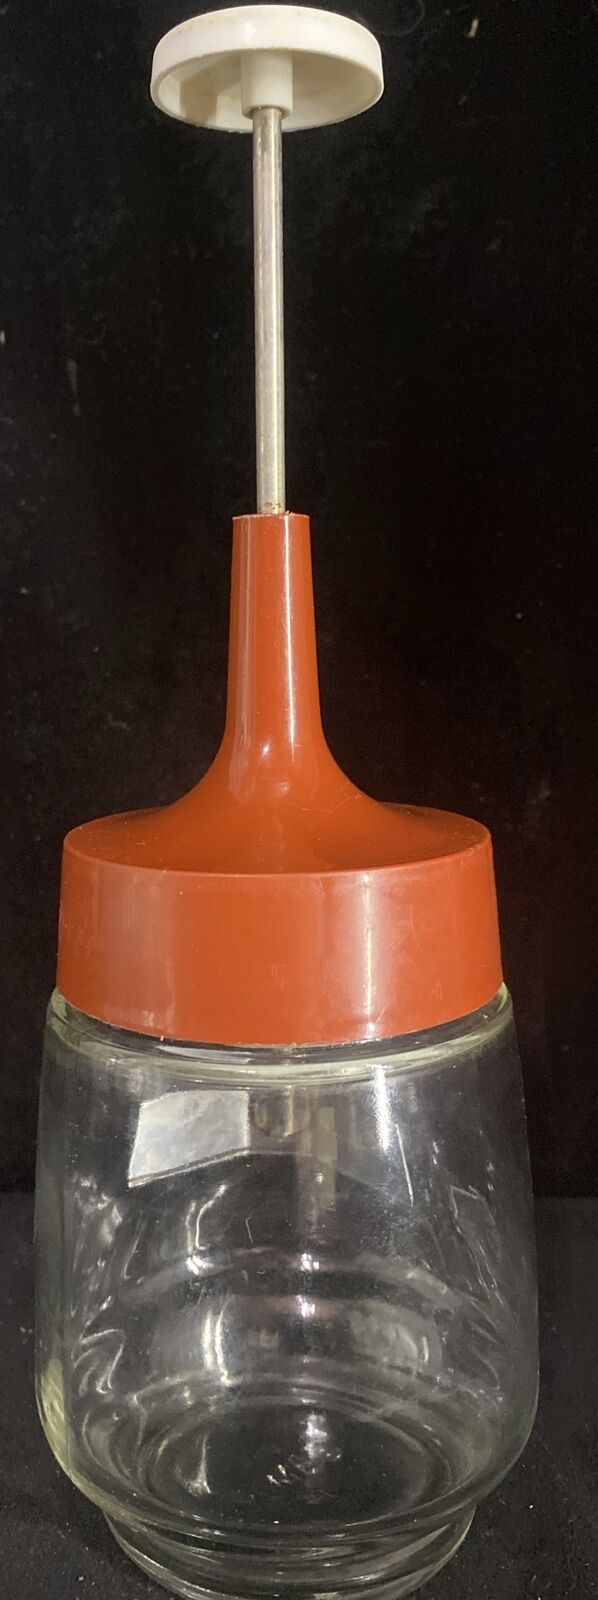 Vintage Gemco Nut/Food Chopper made in USA